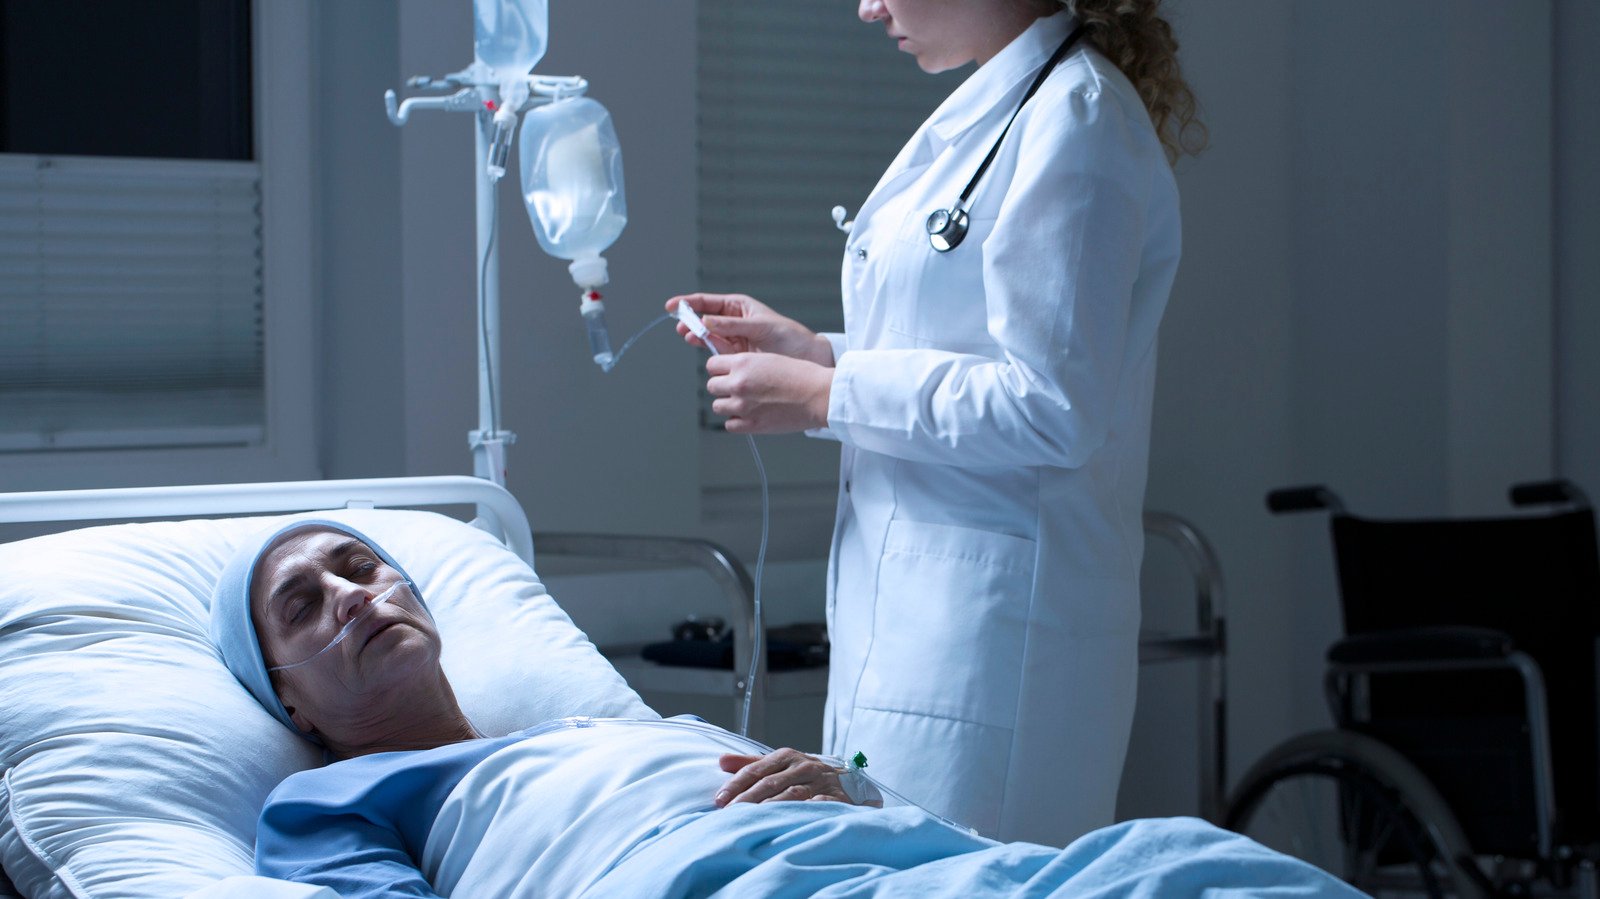 Does Morphine Speed Up Death At The End Of Life? What We Know - Health Digest